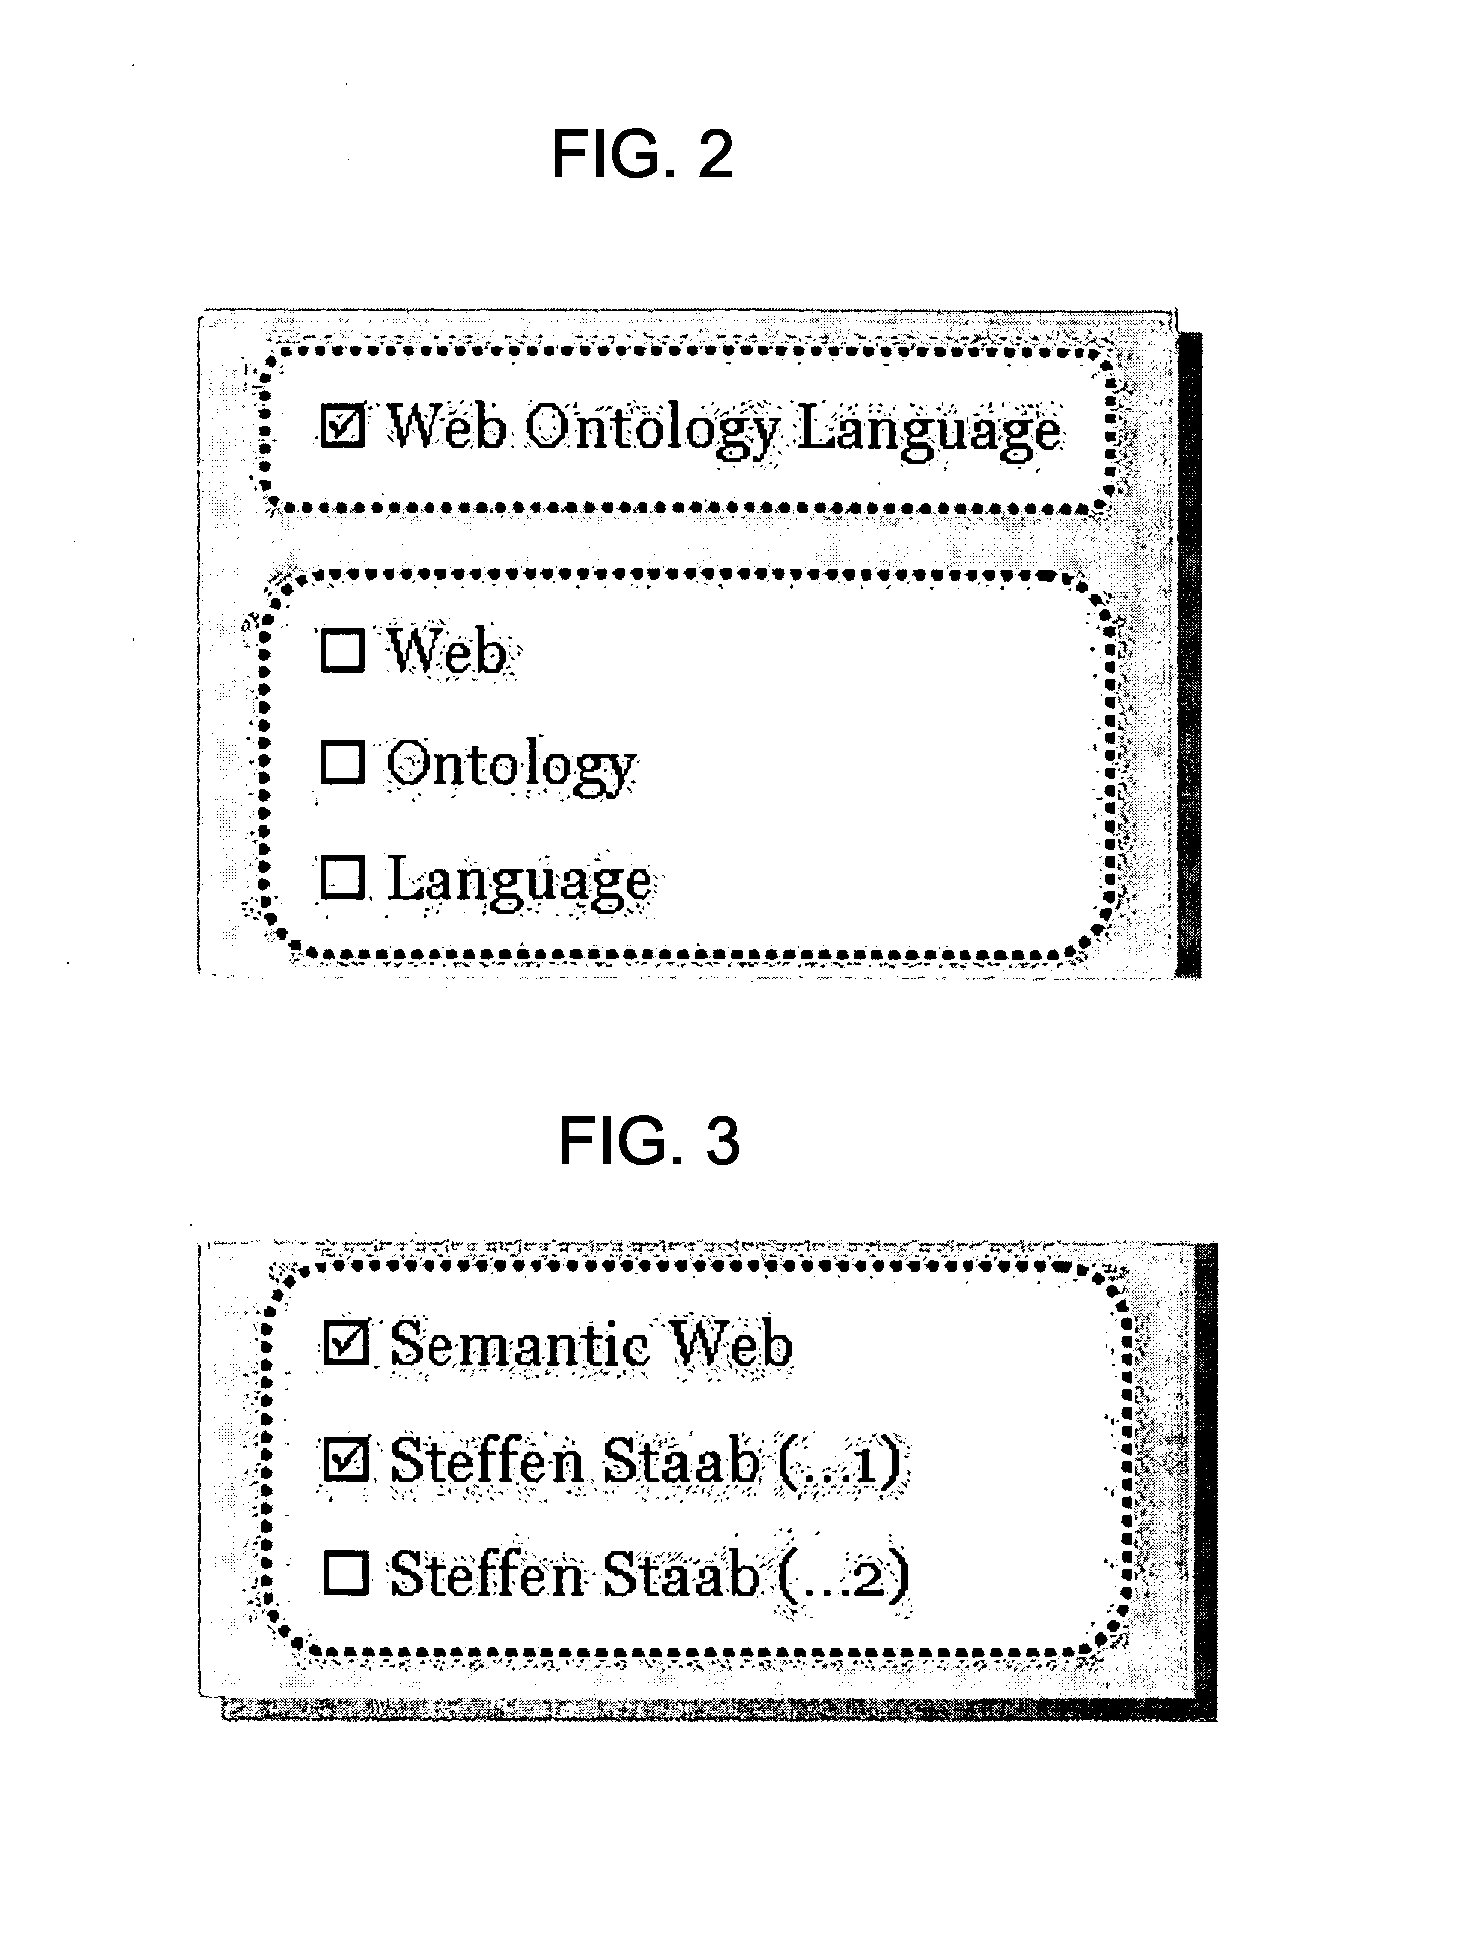 Multi-entity-centric integrated search system and method